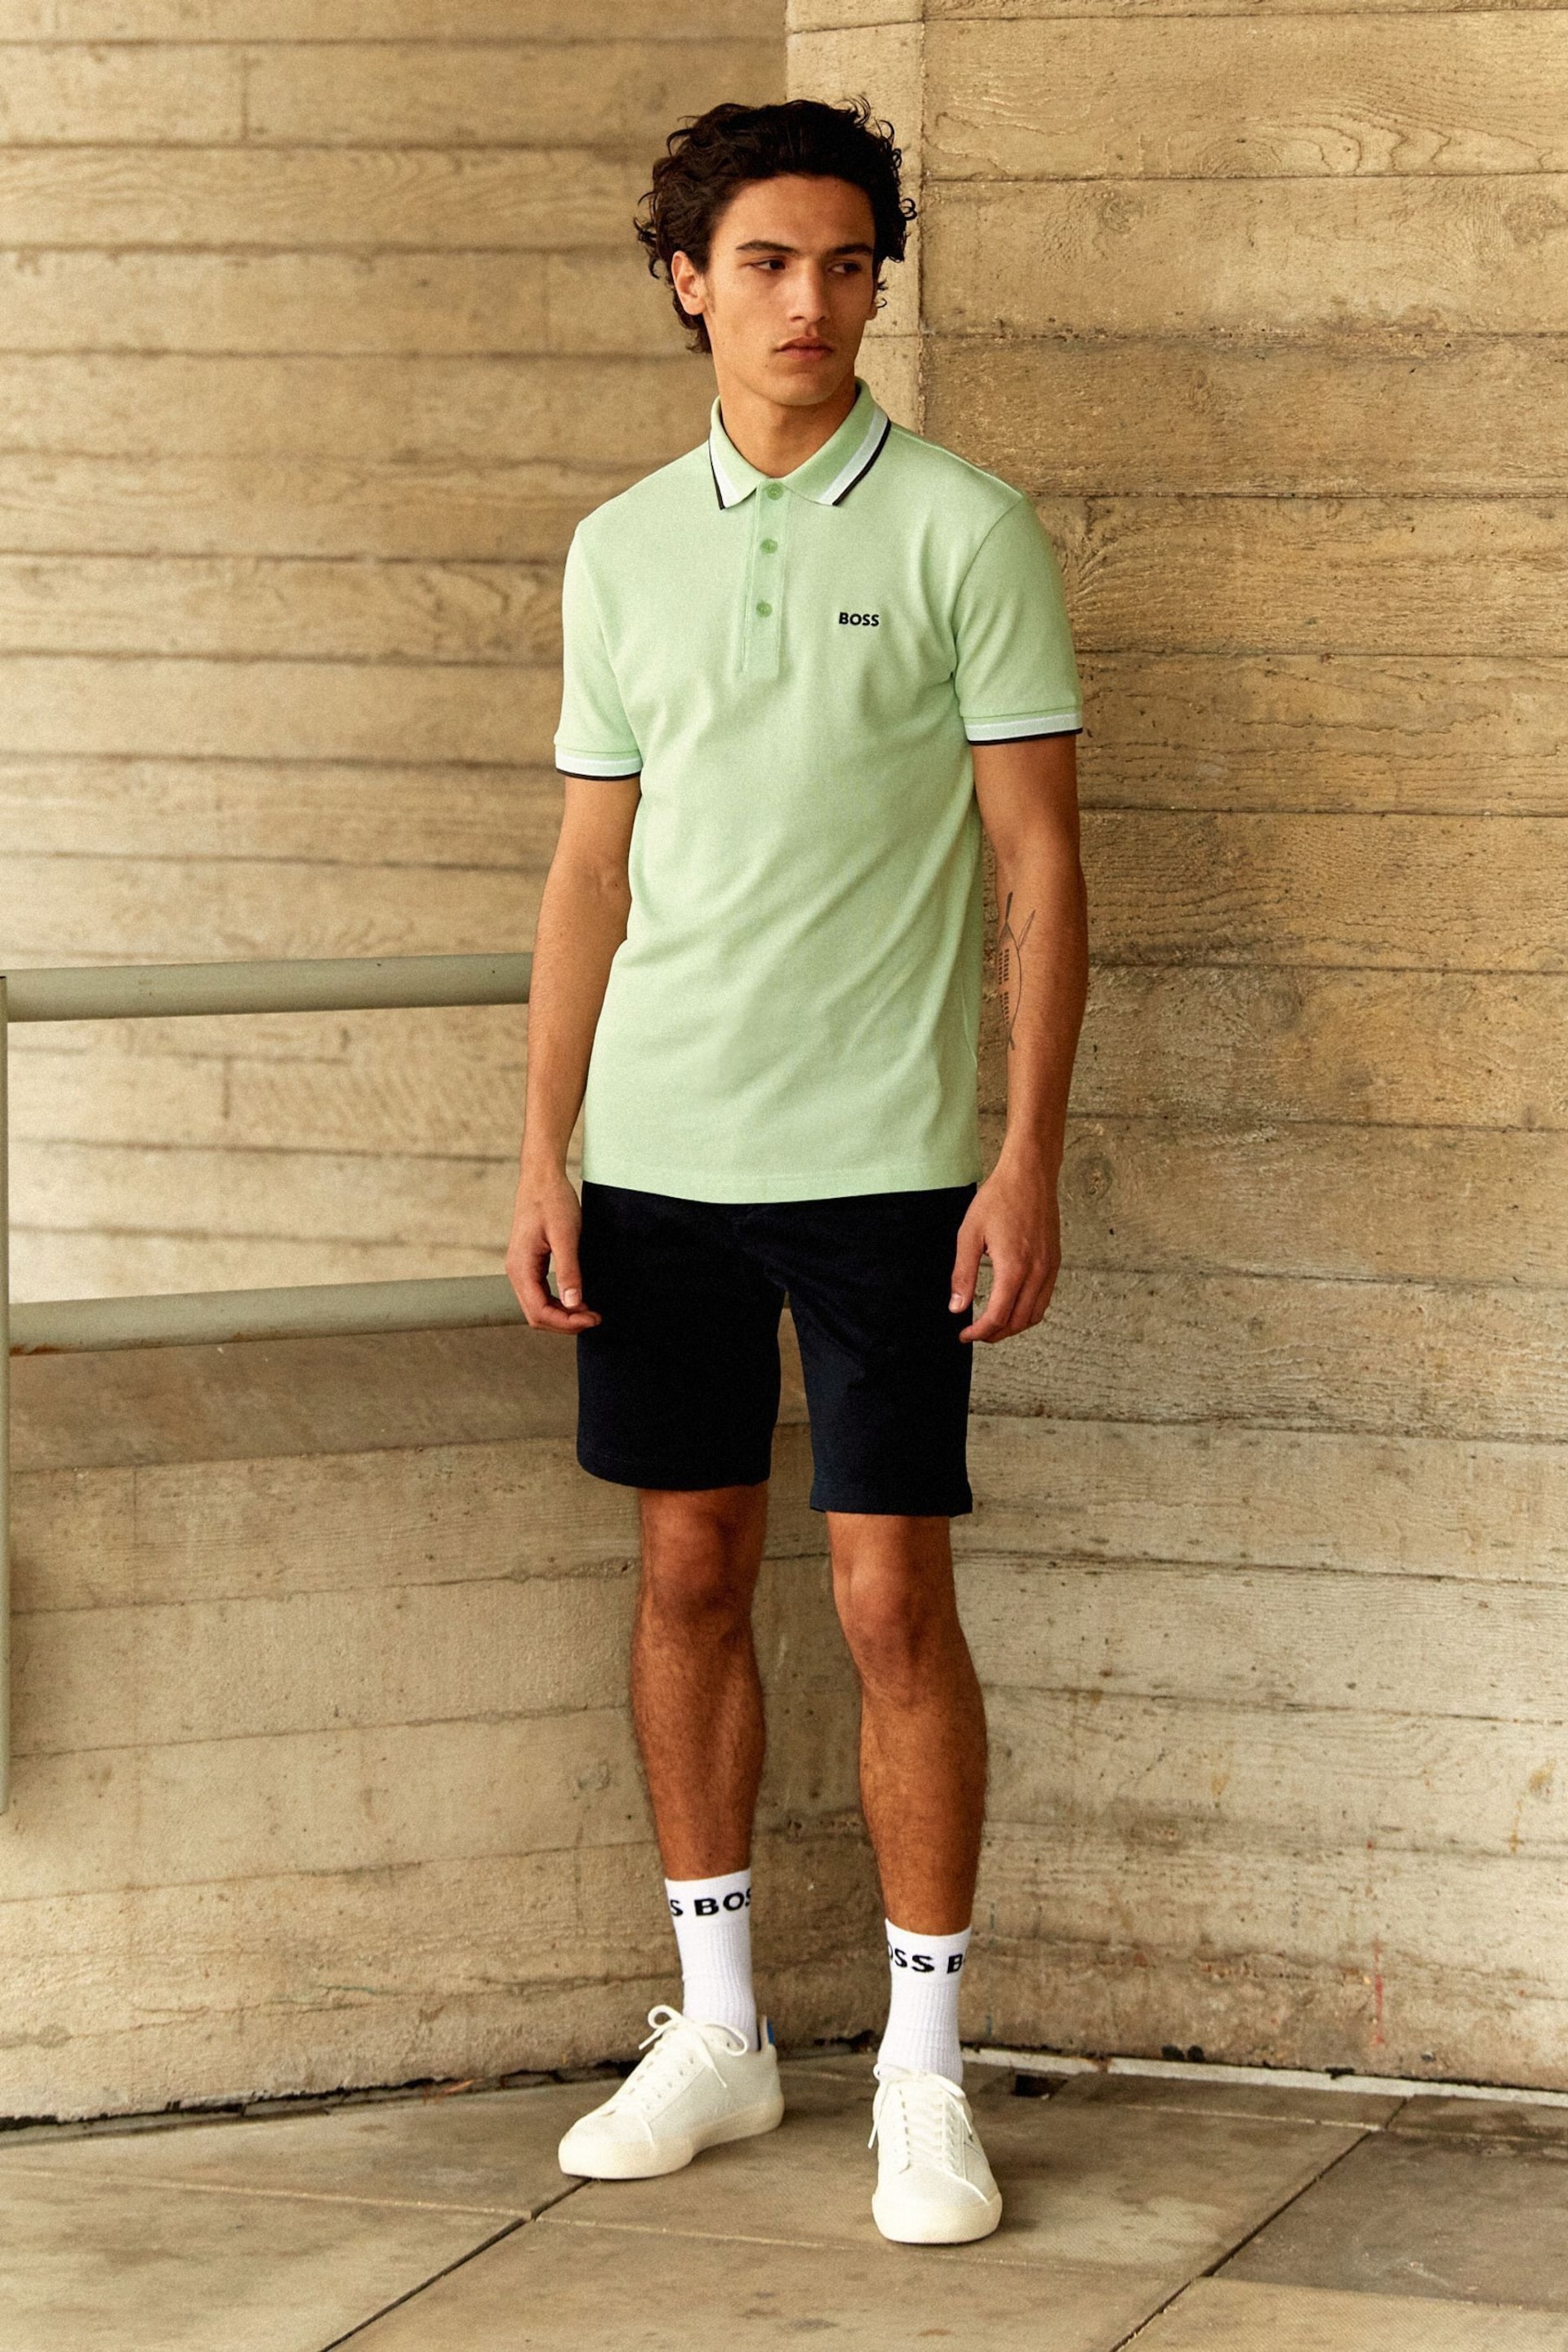 BOSS Bright Green Cotton Polo Shirt With Contrast Logo Details - Image 1 of 8